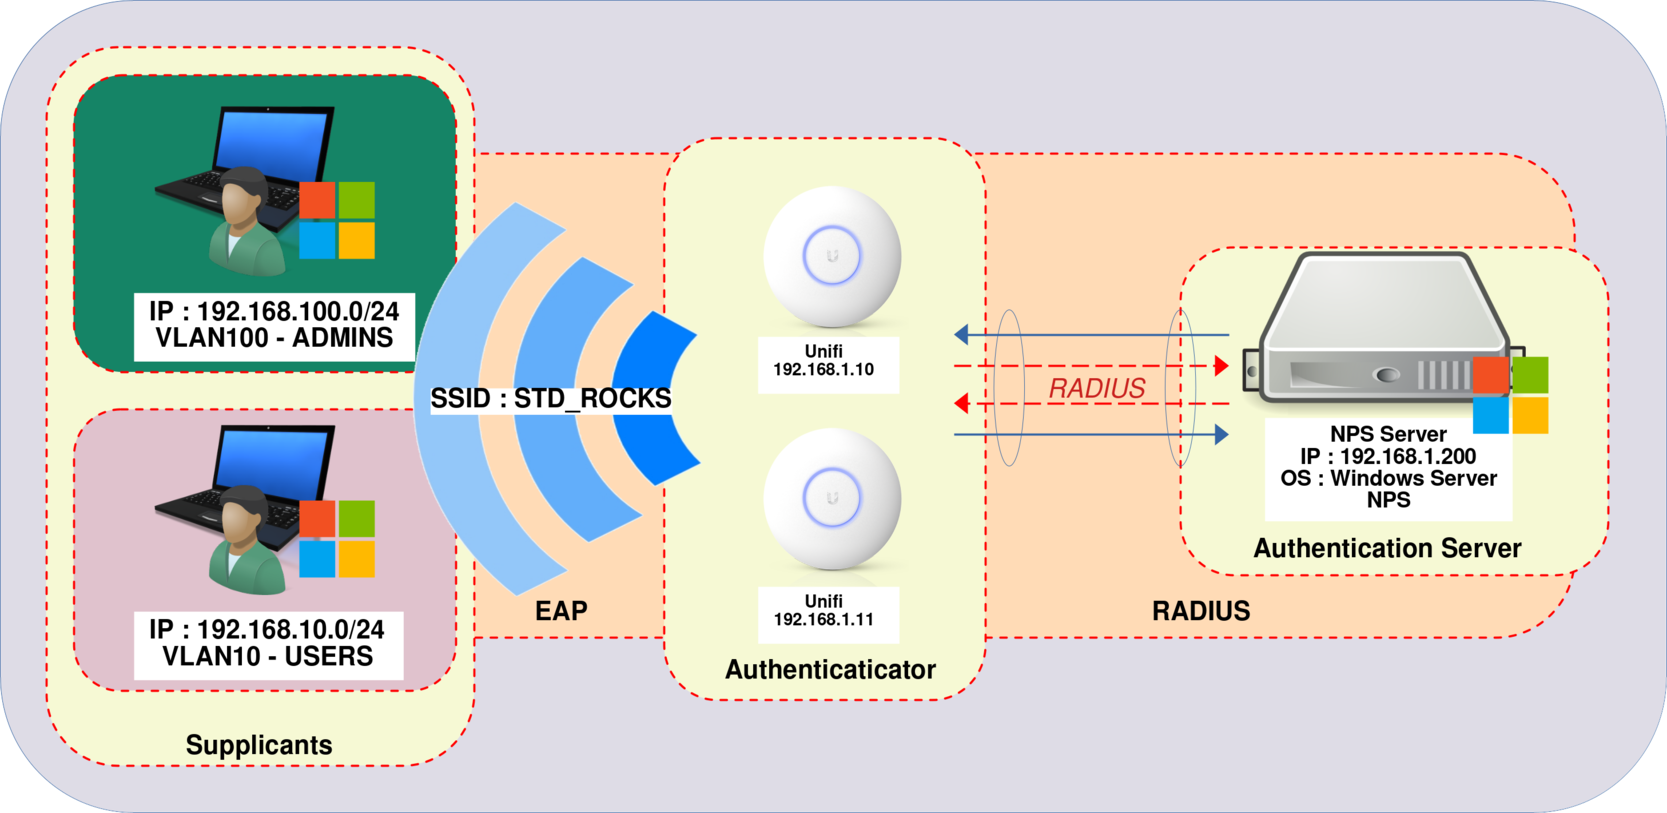 Network diagram showing dynamic VLAN assignment on a RADIUS architecture between a WiFi supplicant, an authenticator and a RADIUS server